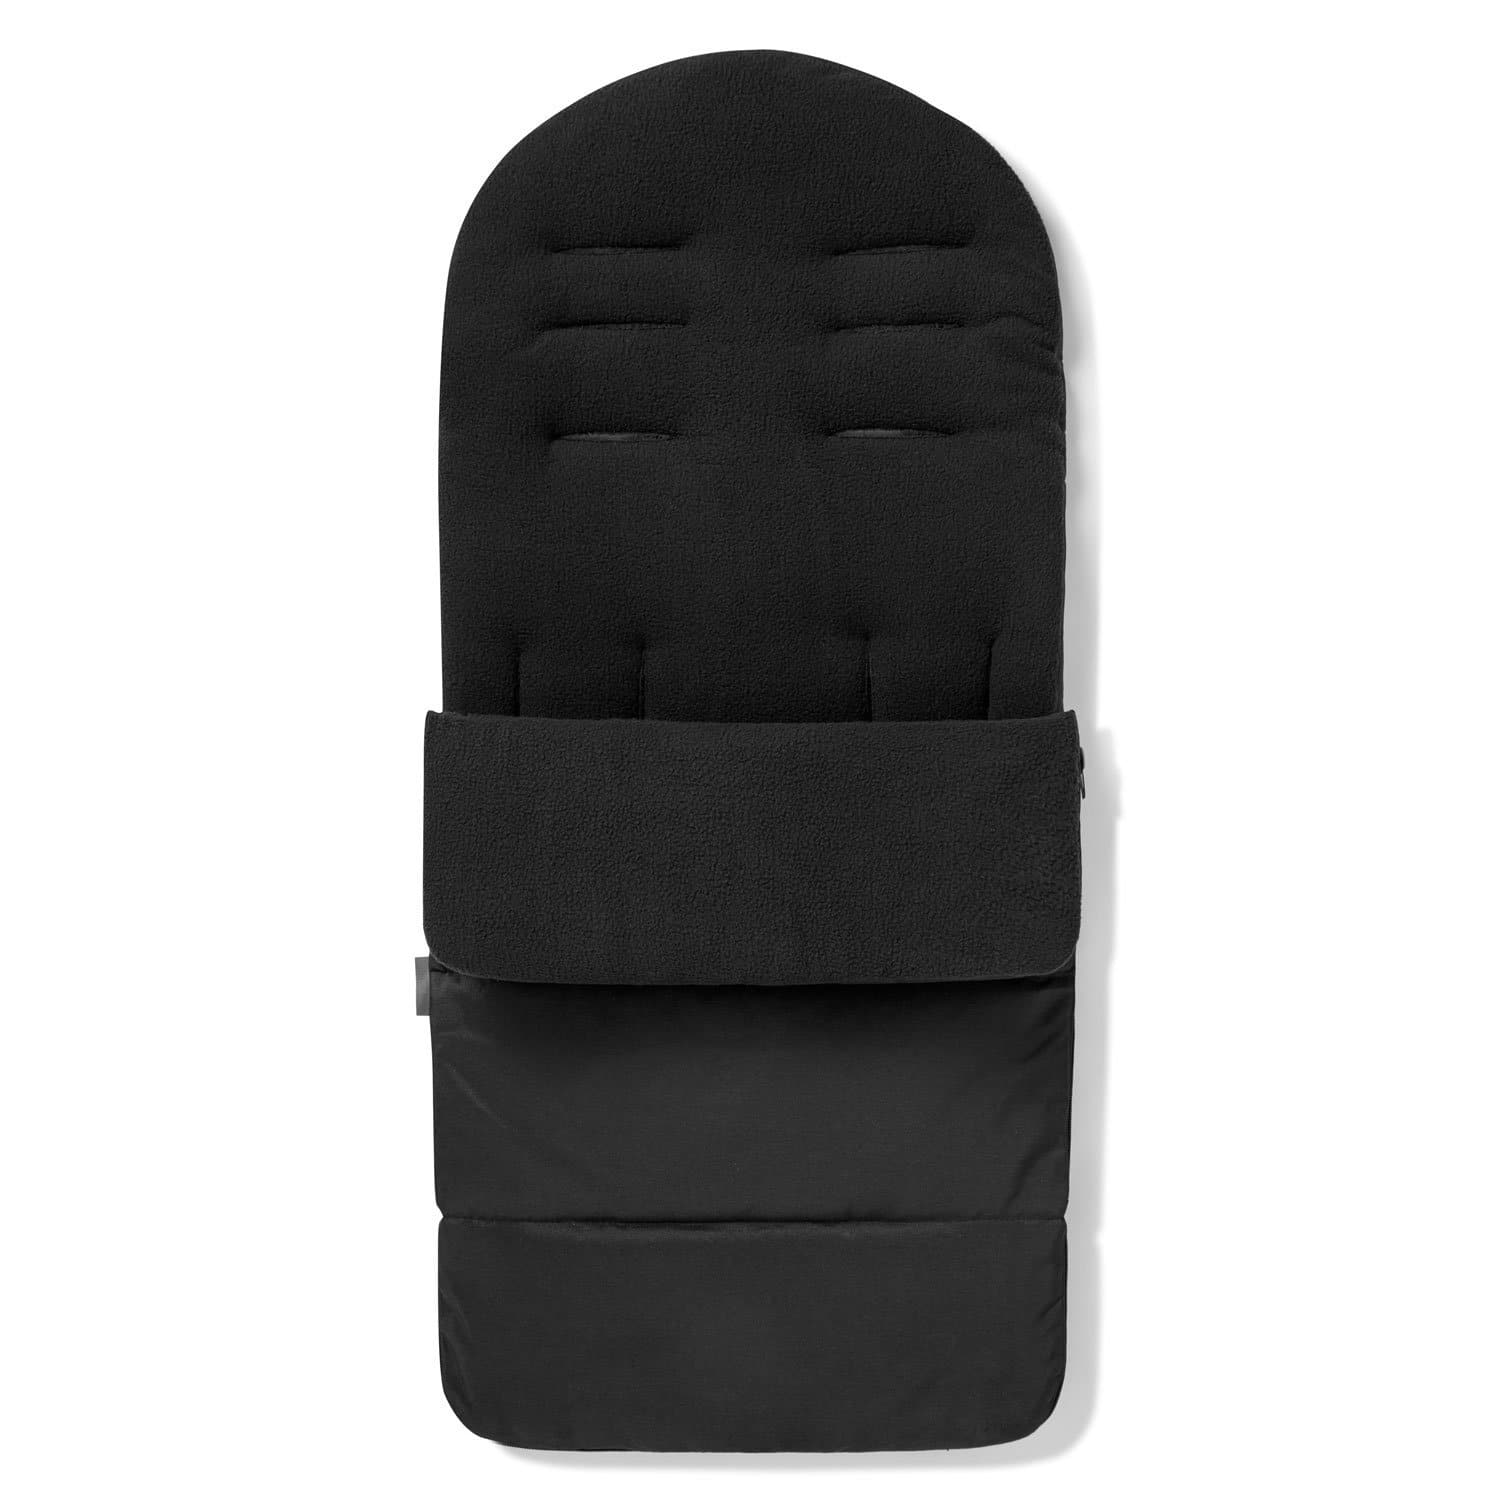 Premium Footmuff / Cosy Toes Compatible with Jane - Black Jack / Fits All Models | For Your Little One